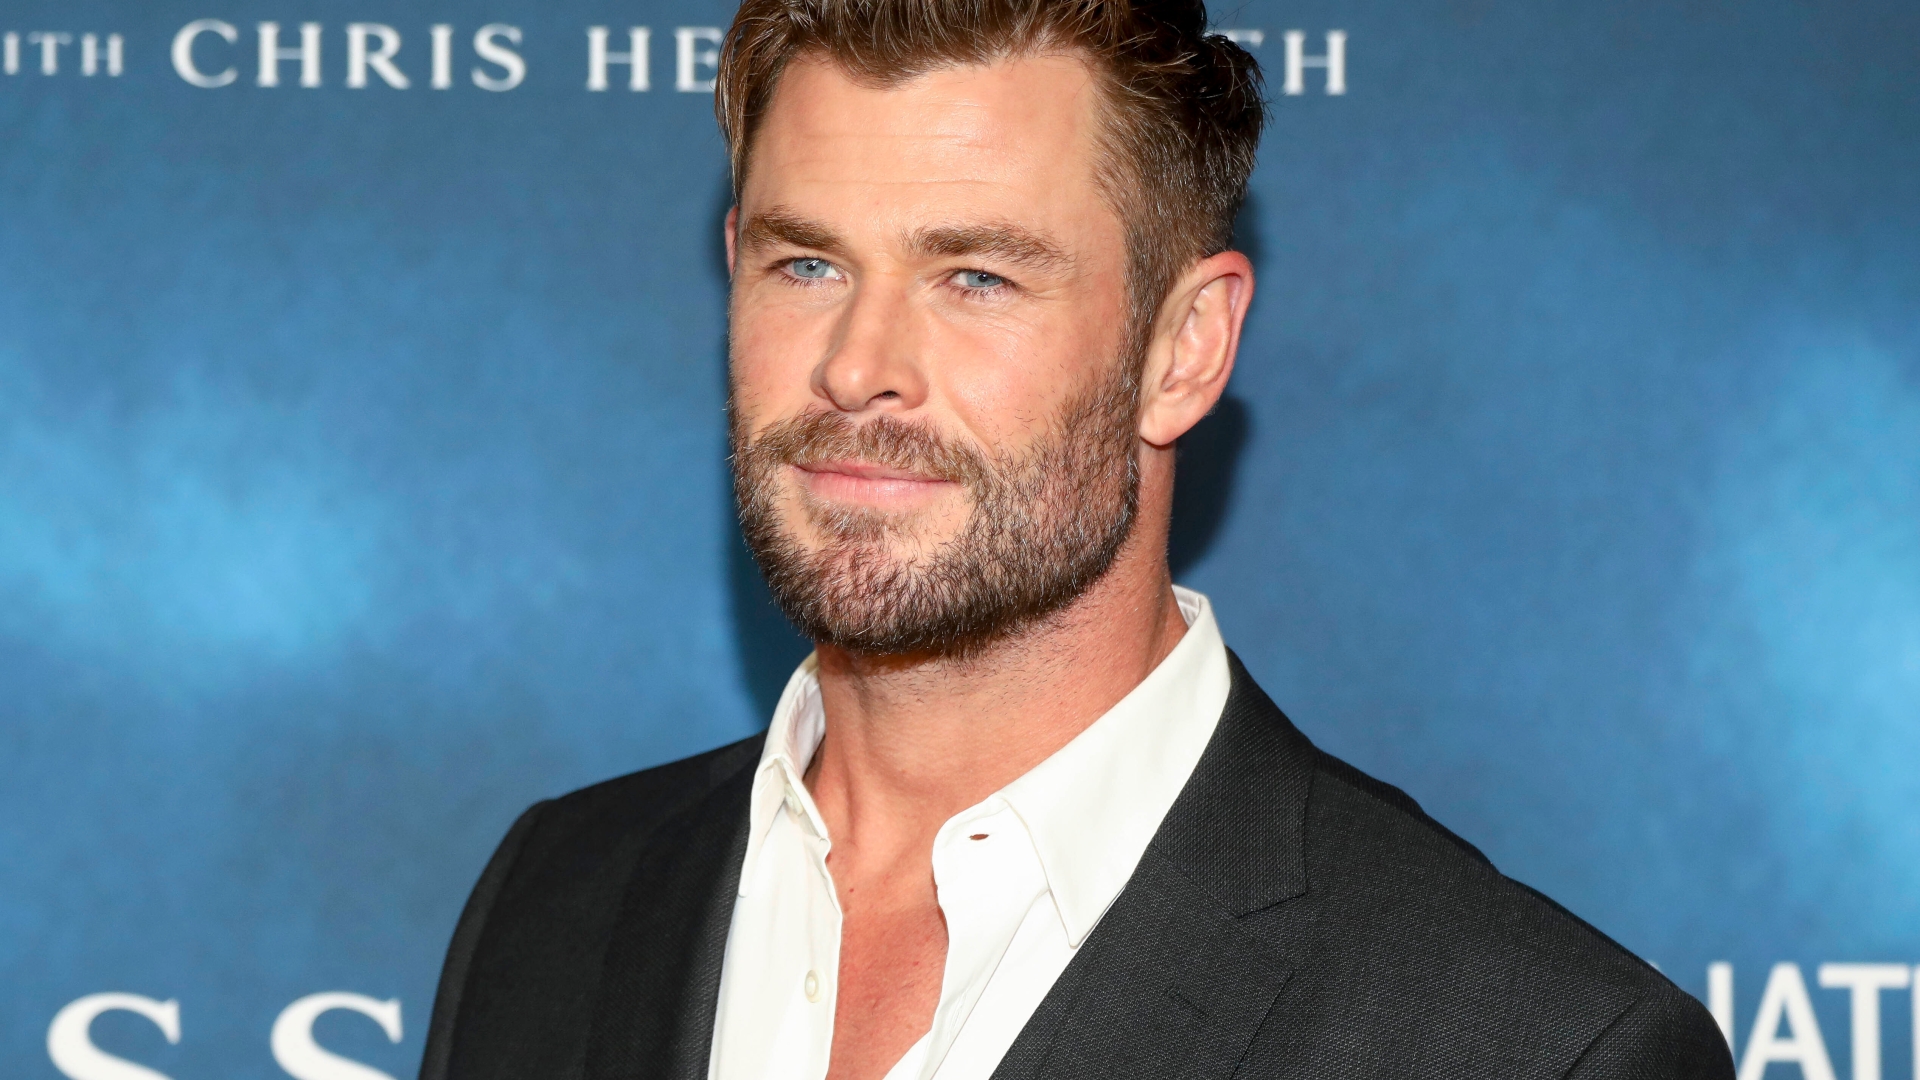 Chris Hemsworth says he is at high risk for Alzheimer’s. Here are the 5 signs that you may be too